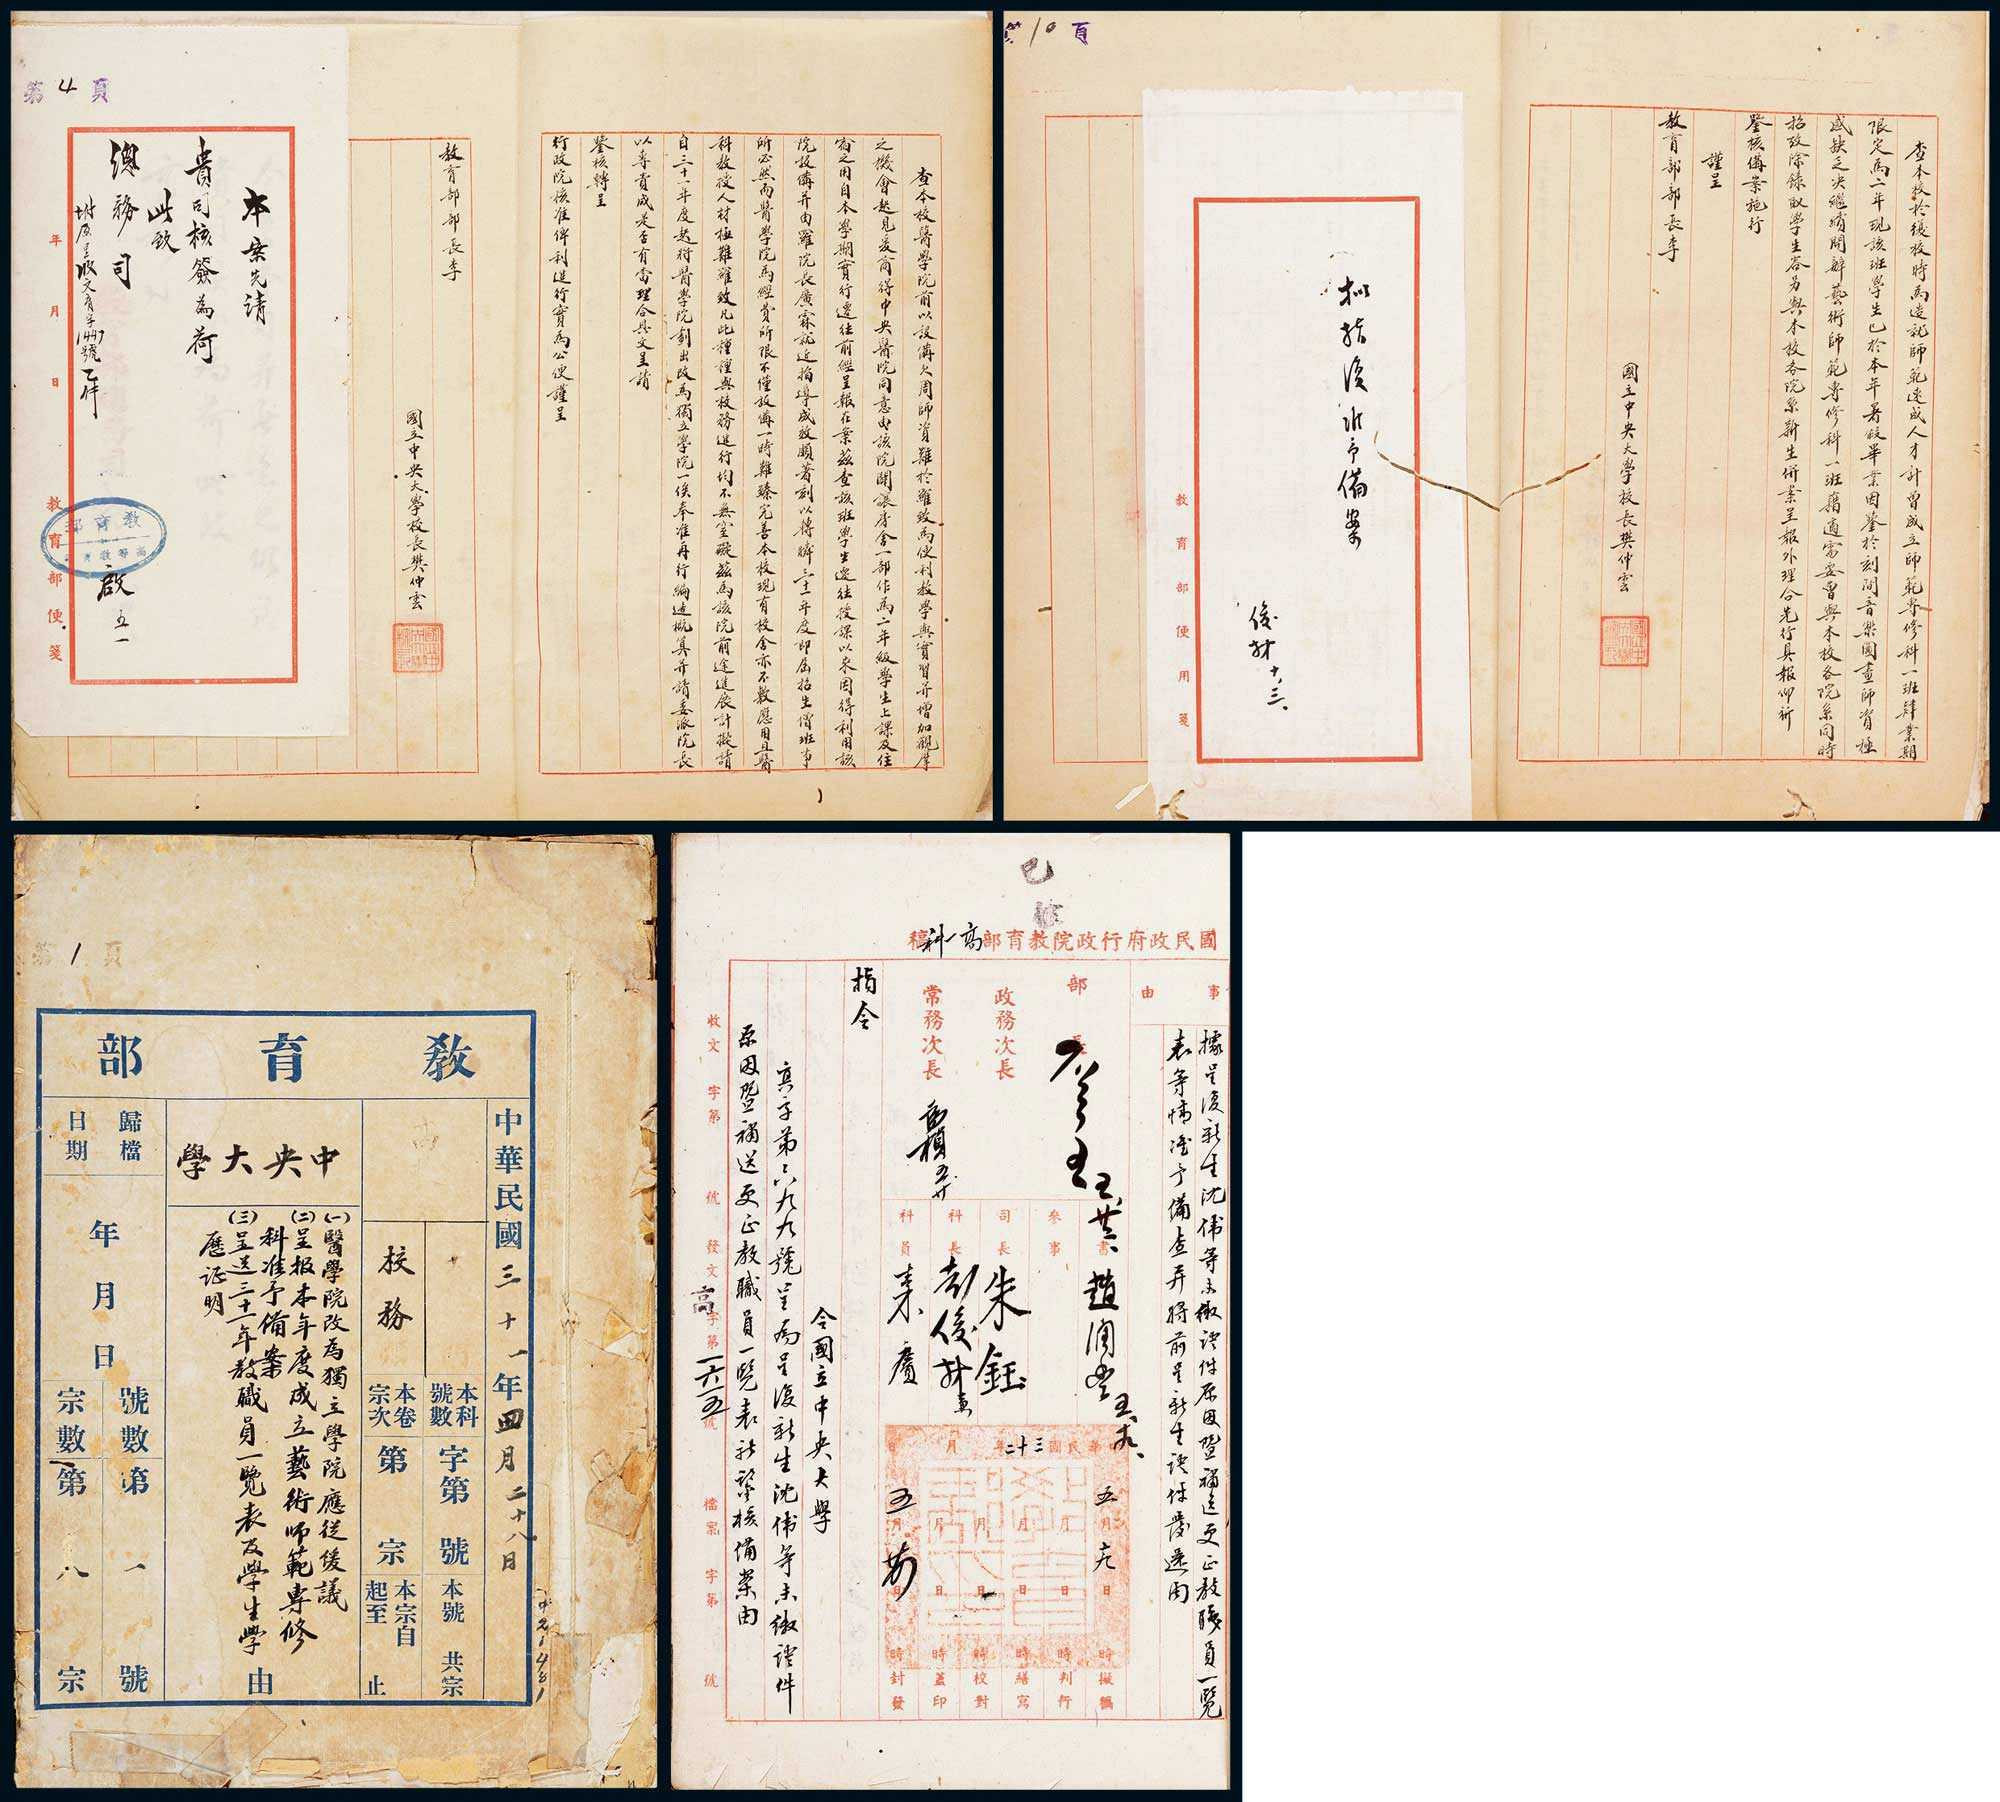 One volume of letters, official letters and materials about the National Central University collected by the Ministry of Education in the 31st year of the Republic of China (1942)